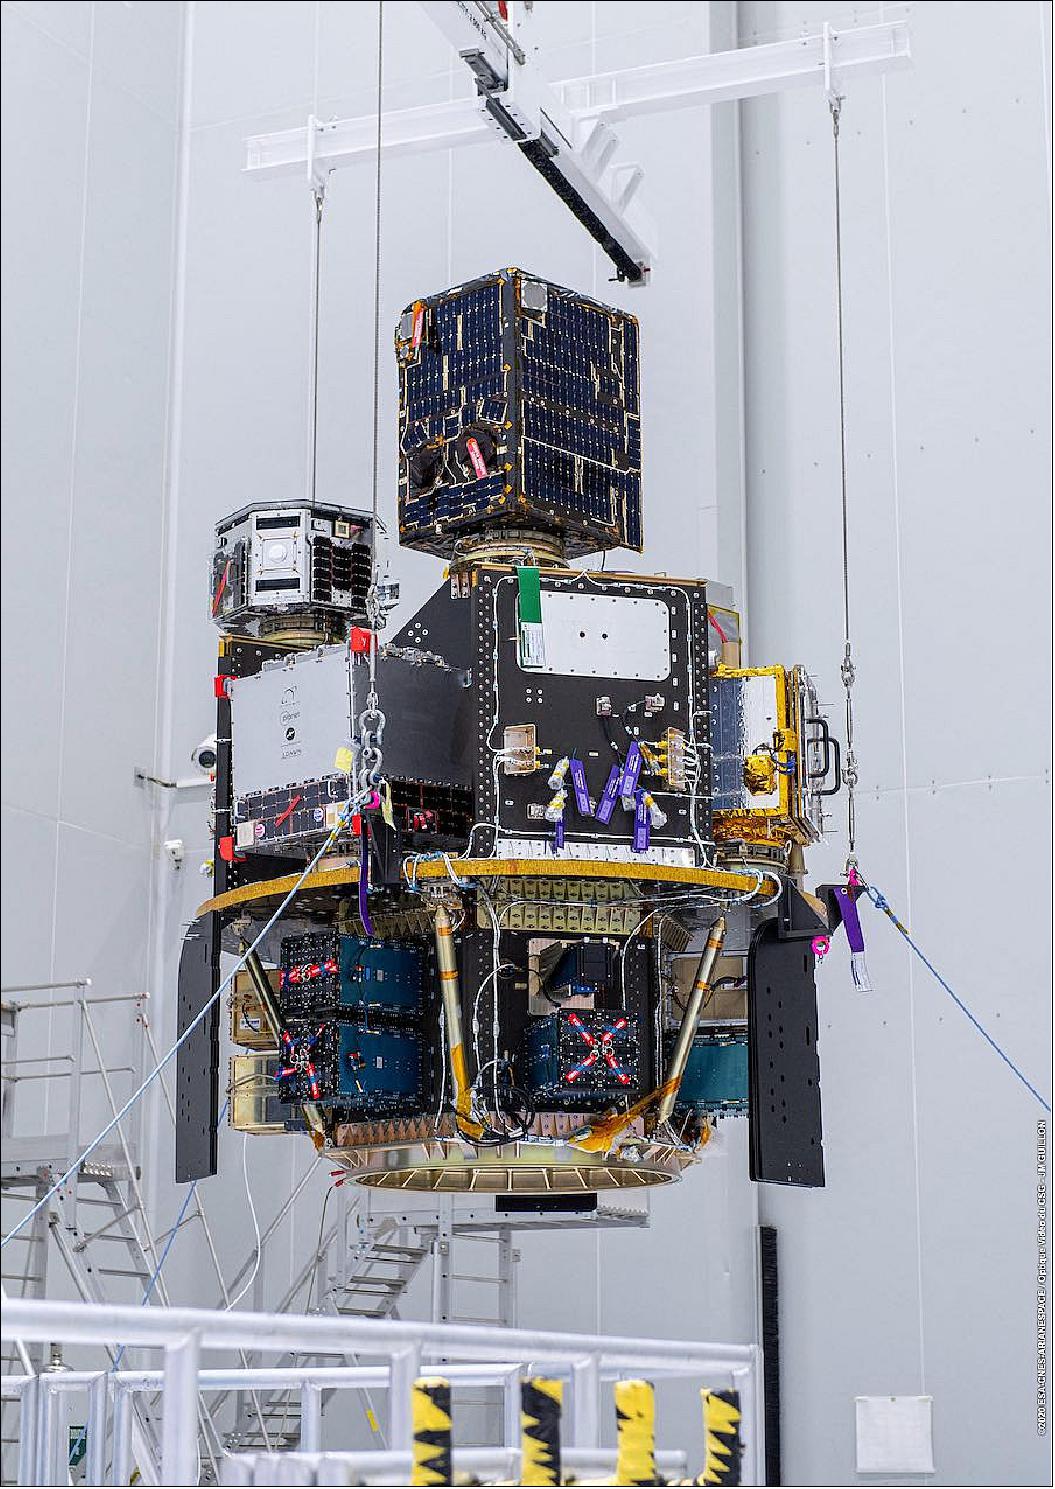 Figure 11: Technicians at the Guiana Space Center lift a stack of 53 small spacecraft for attachment to the Vega rocket’s payload adapter (image credit: ESA/CNES/Arianespace – Photo Optique Video du CSG – JM Guillon)